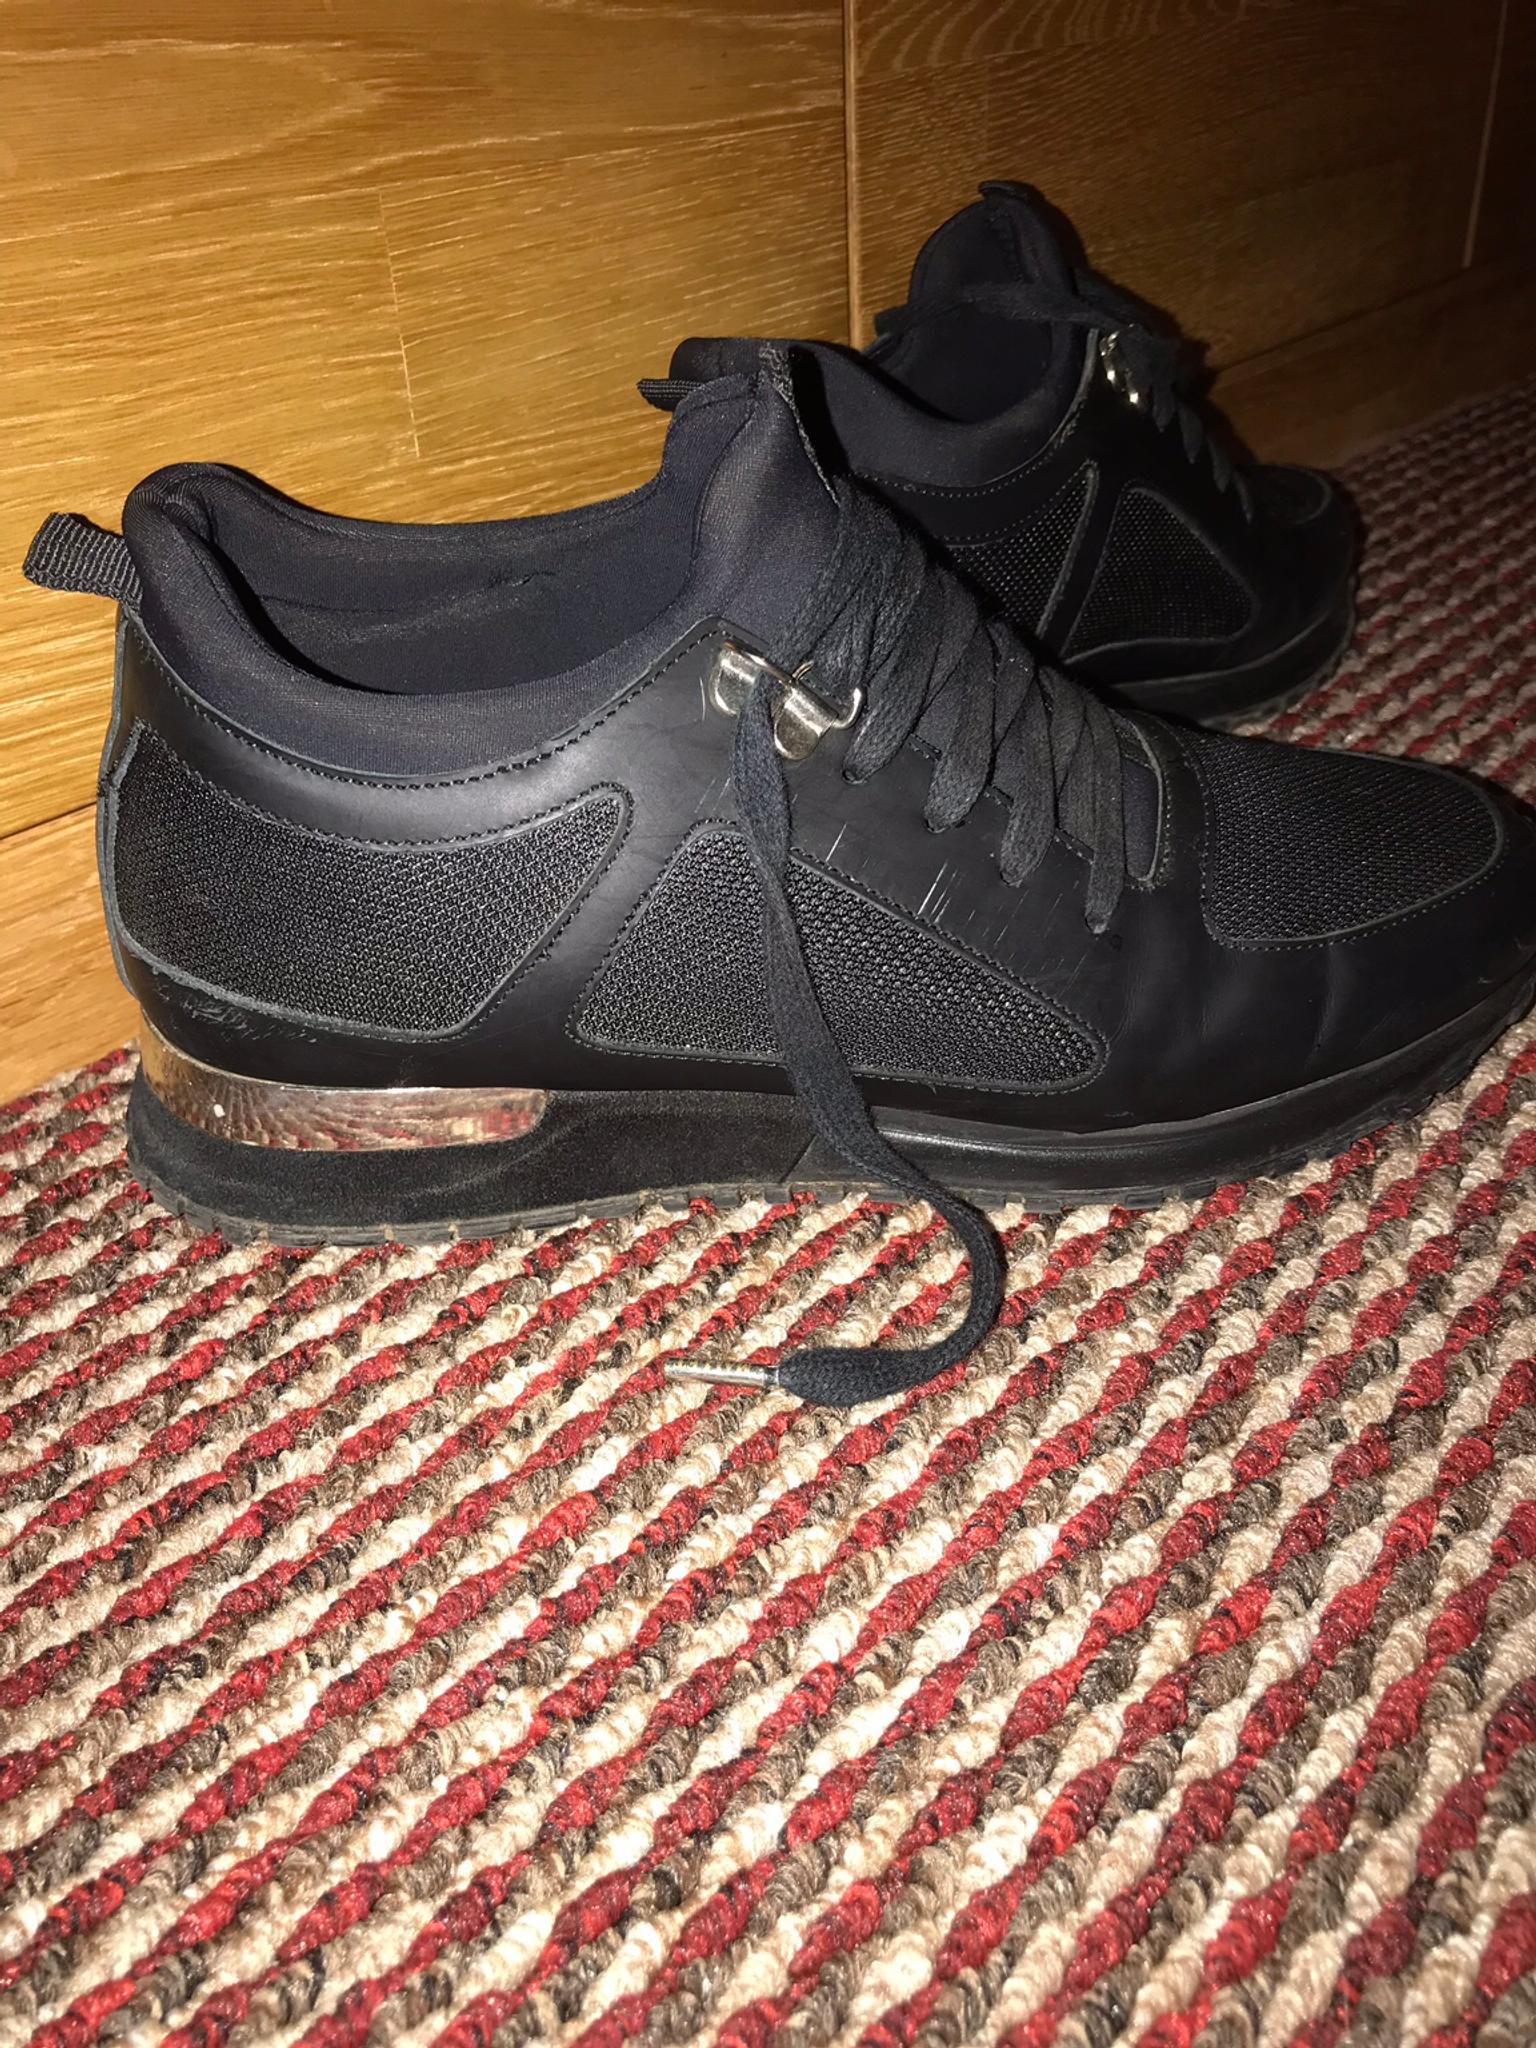 tommy mallet trainers black